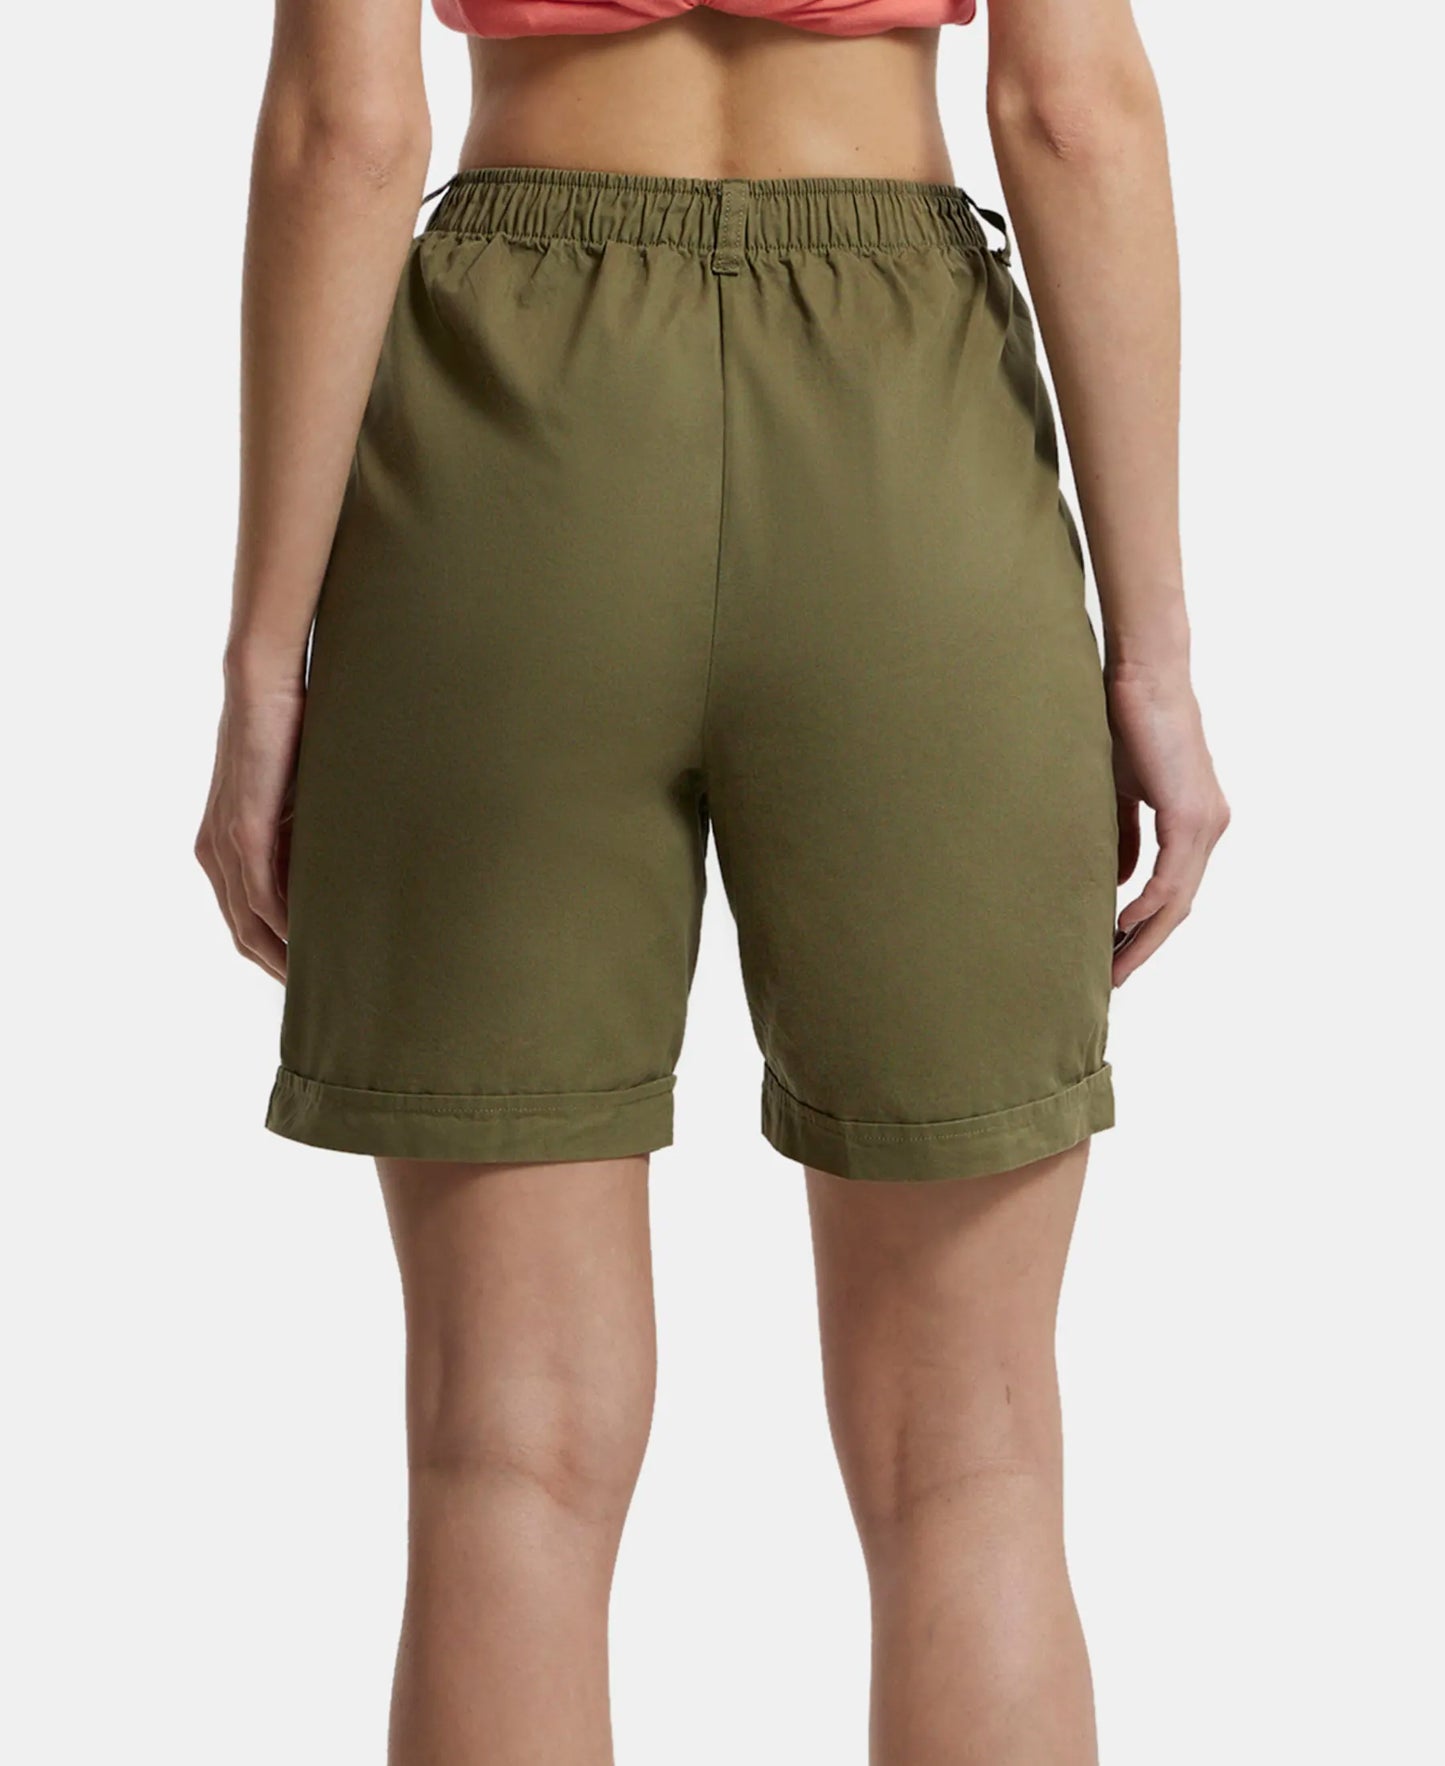 Super Combed Cotton Woven Twill Fabric Relaxed Fit Shorts with Convenient Side Pockets - Burnt Olive-3